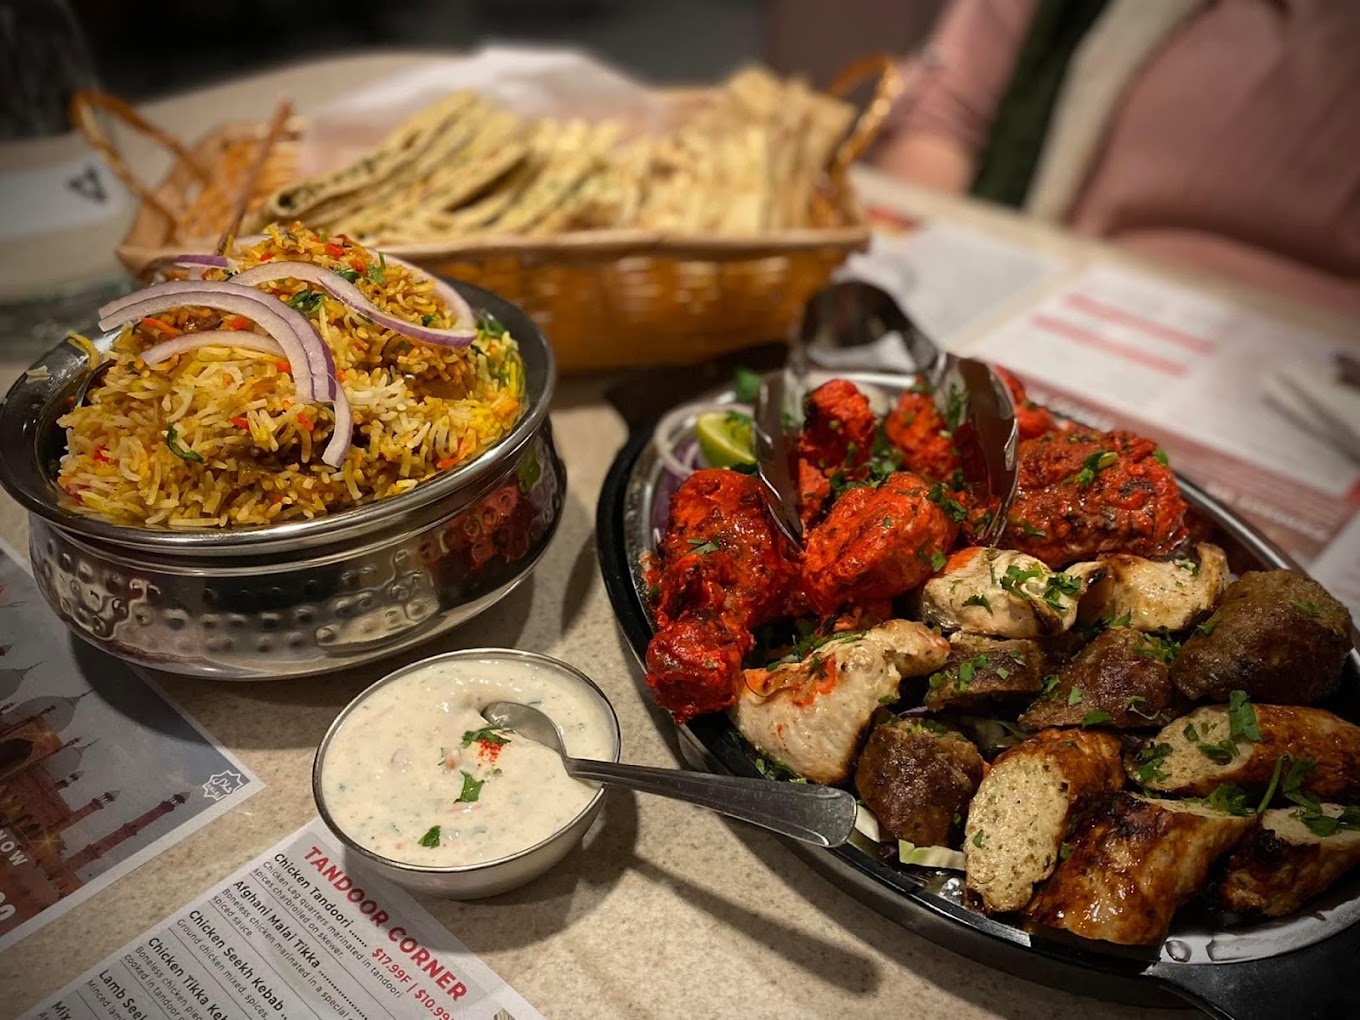 A bread basket with naan, serving bowl of biryani, and platter of tandoori meats.